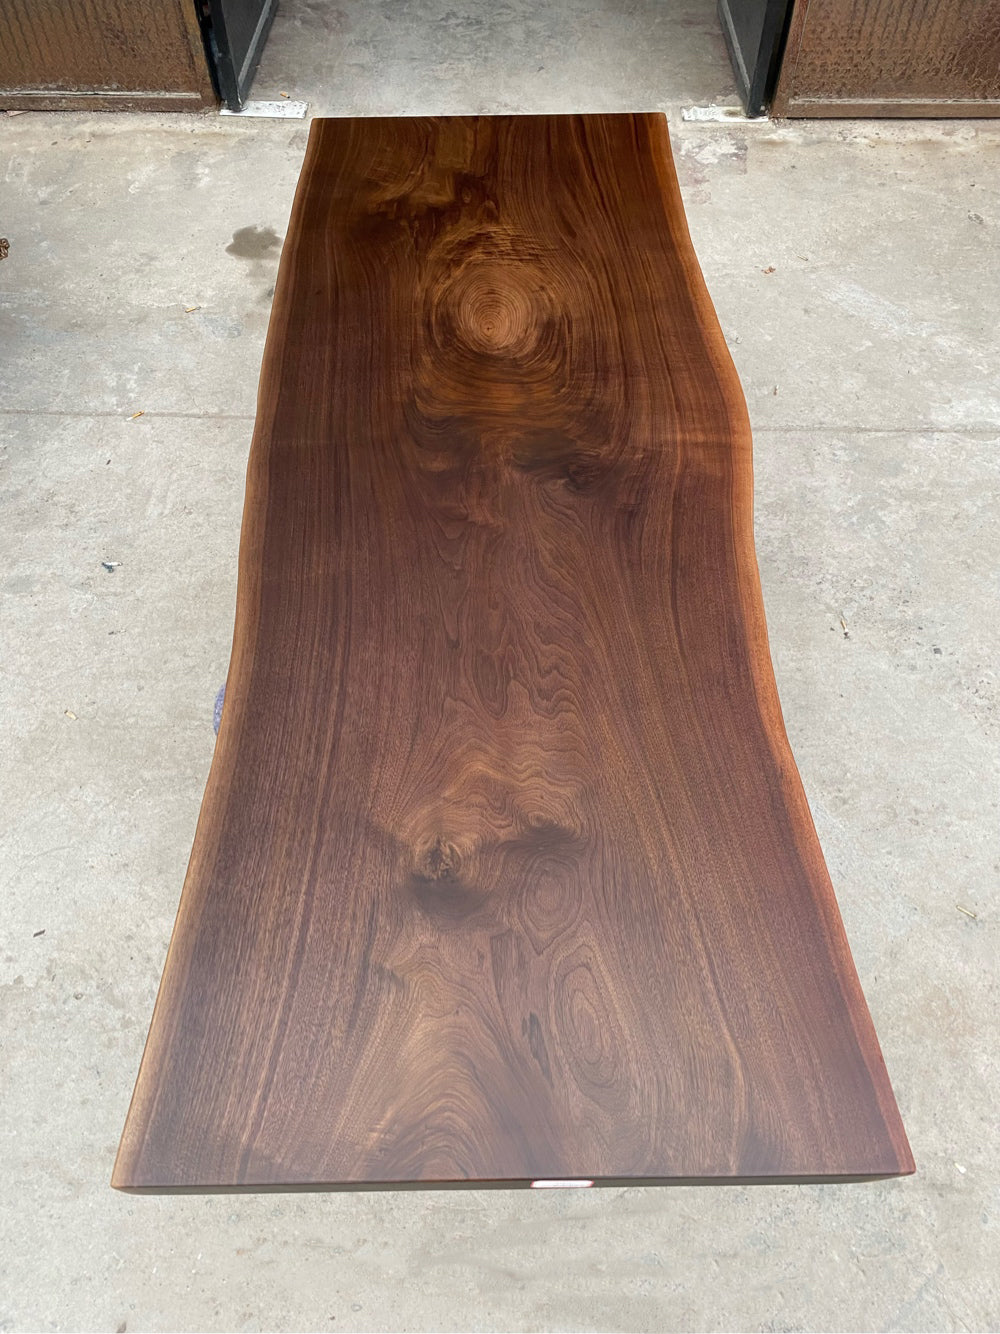 Solid American Black Walnut, Kitchen table, Live Edge Table